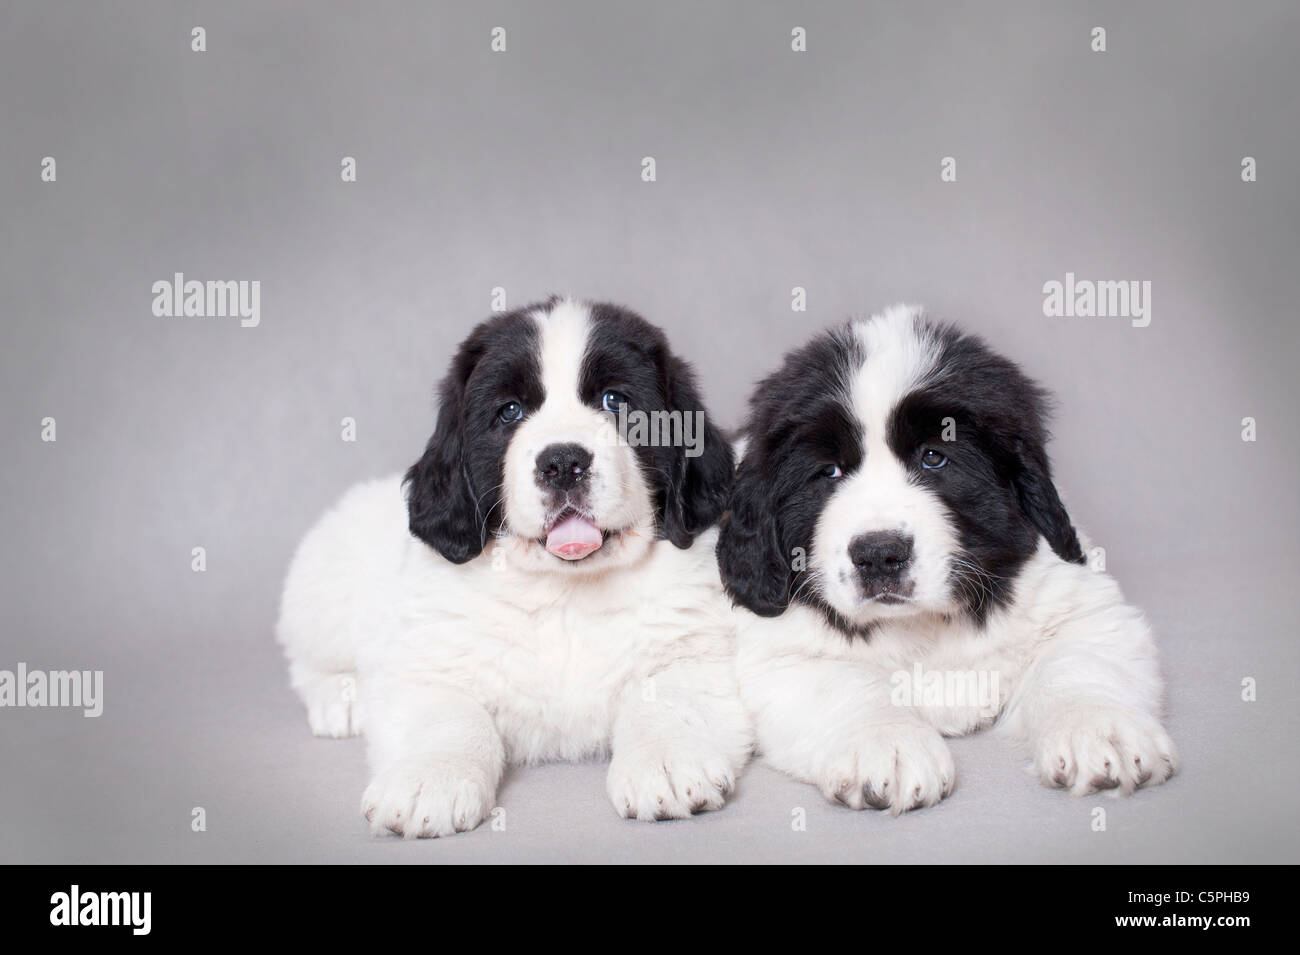 Two little Landseer (newfoundland type) puppies portrait at grey background Stock Photo